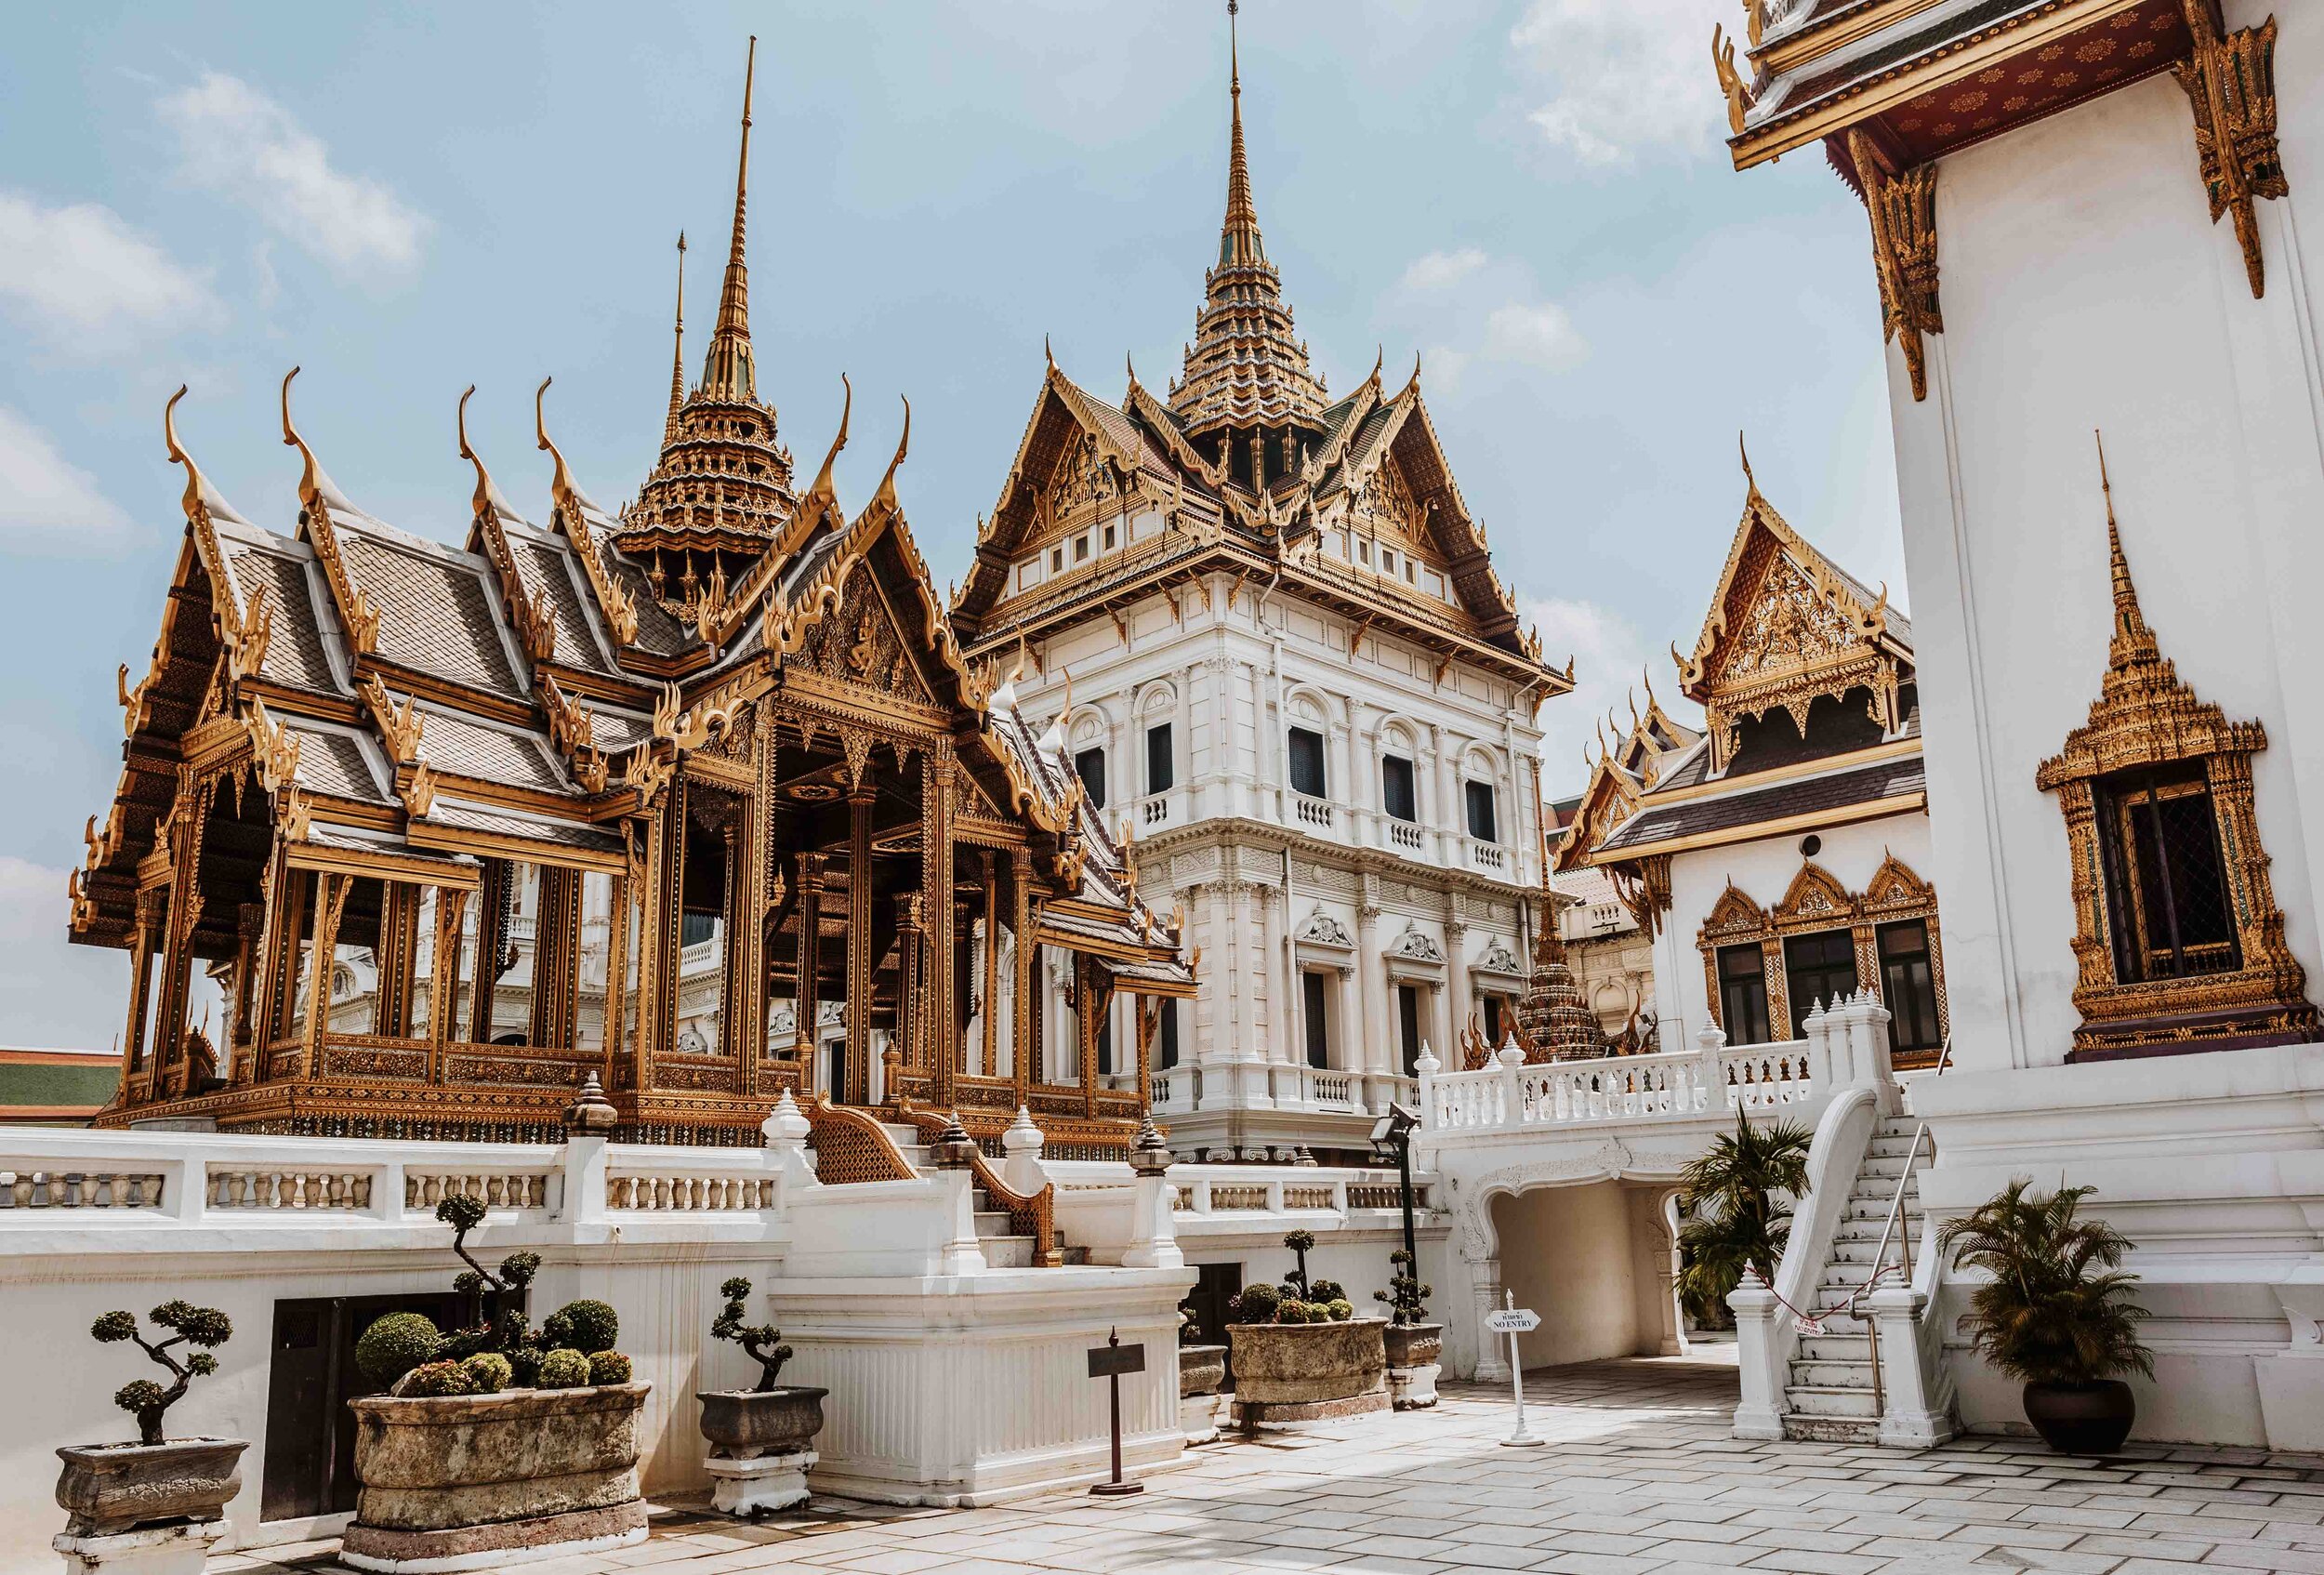 The beautiful white and gold temple of Wat Pho - Things to do on your 7 days in thailand itinerary